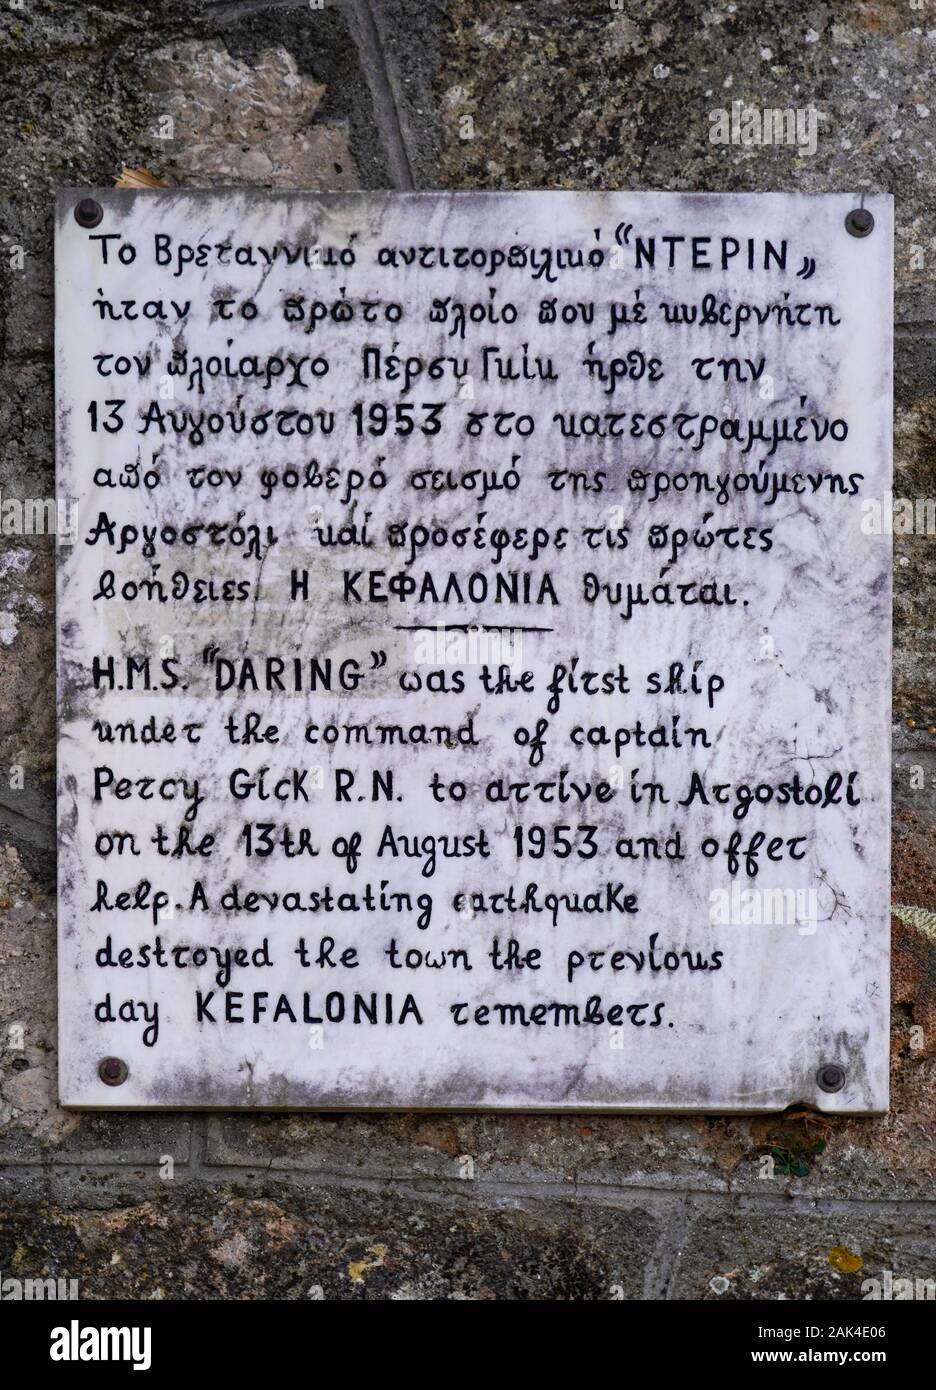 A remembrance plaque to the Royal Navy ship that helped the city and survivors after the 1953 earthquake. Argostoli, Cephalonia, Greece Stock Photo